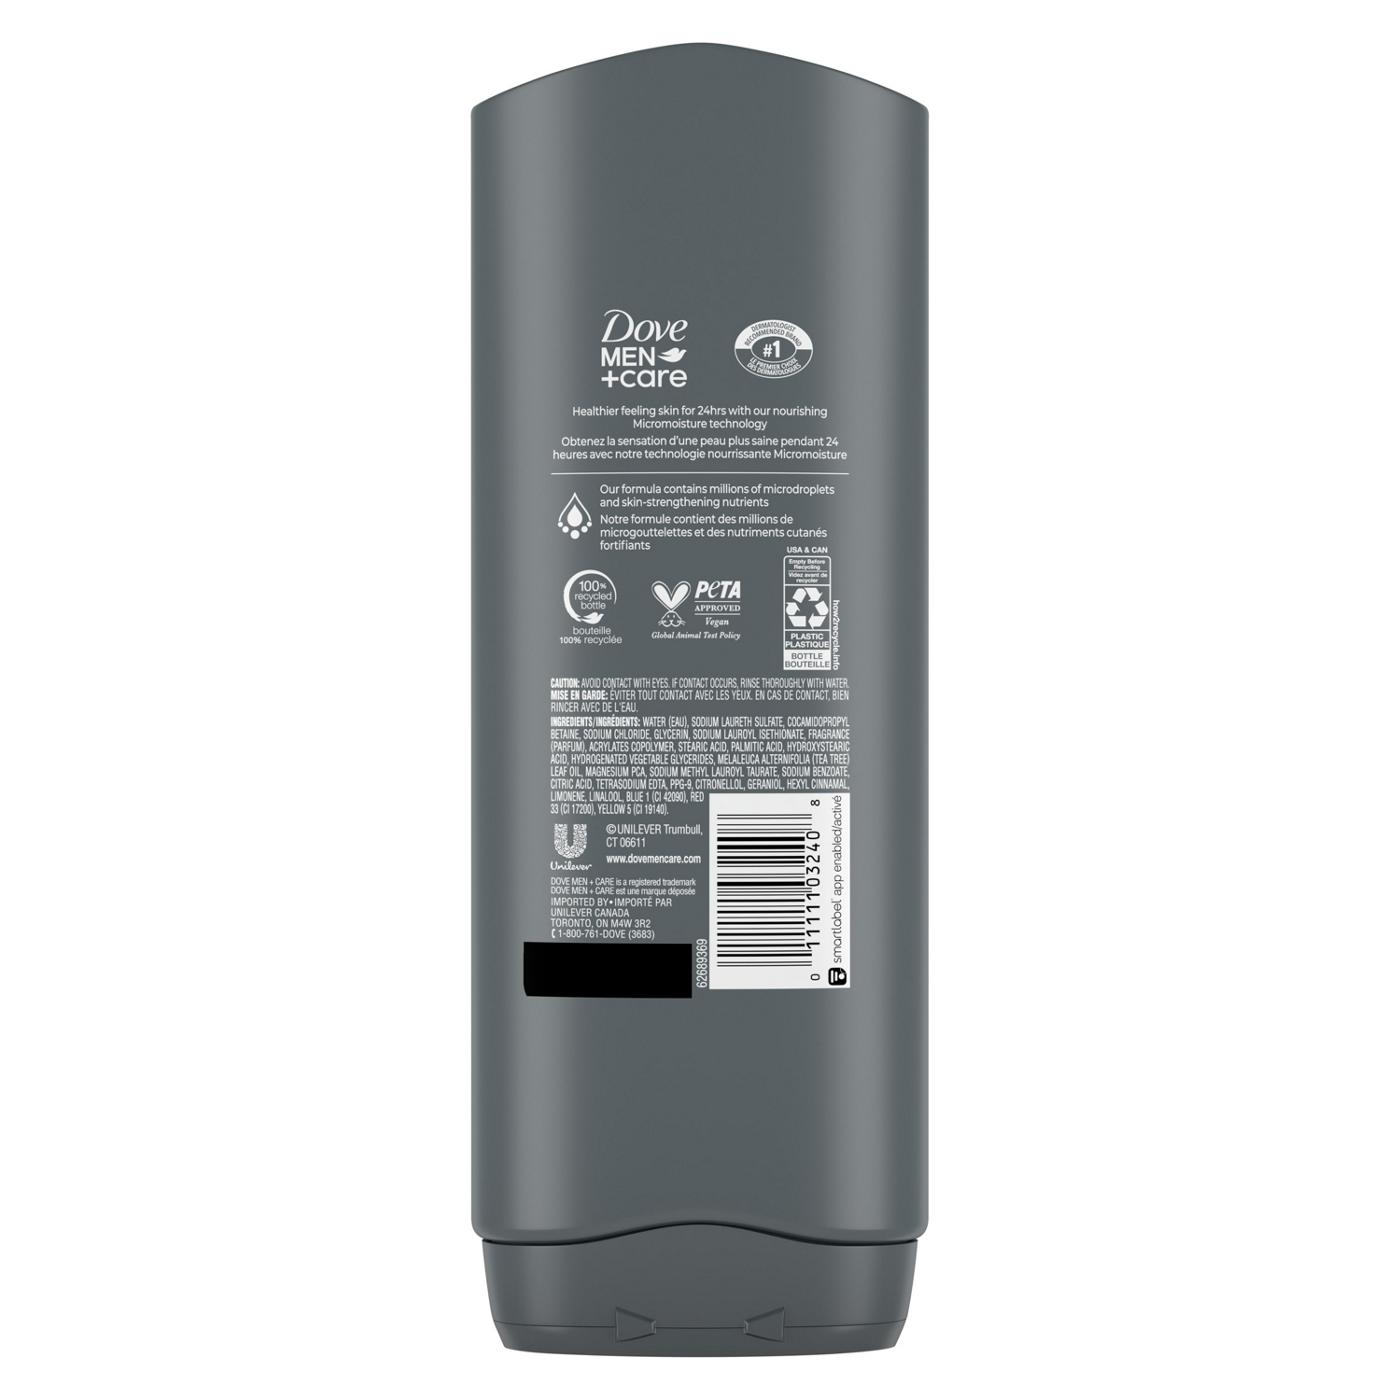 Dove Men+Care Recover 3 in 1 Wash with Peppermint; image 2 of 3